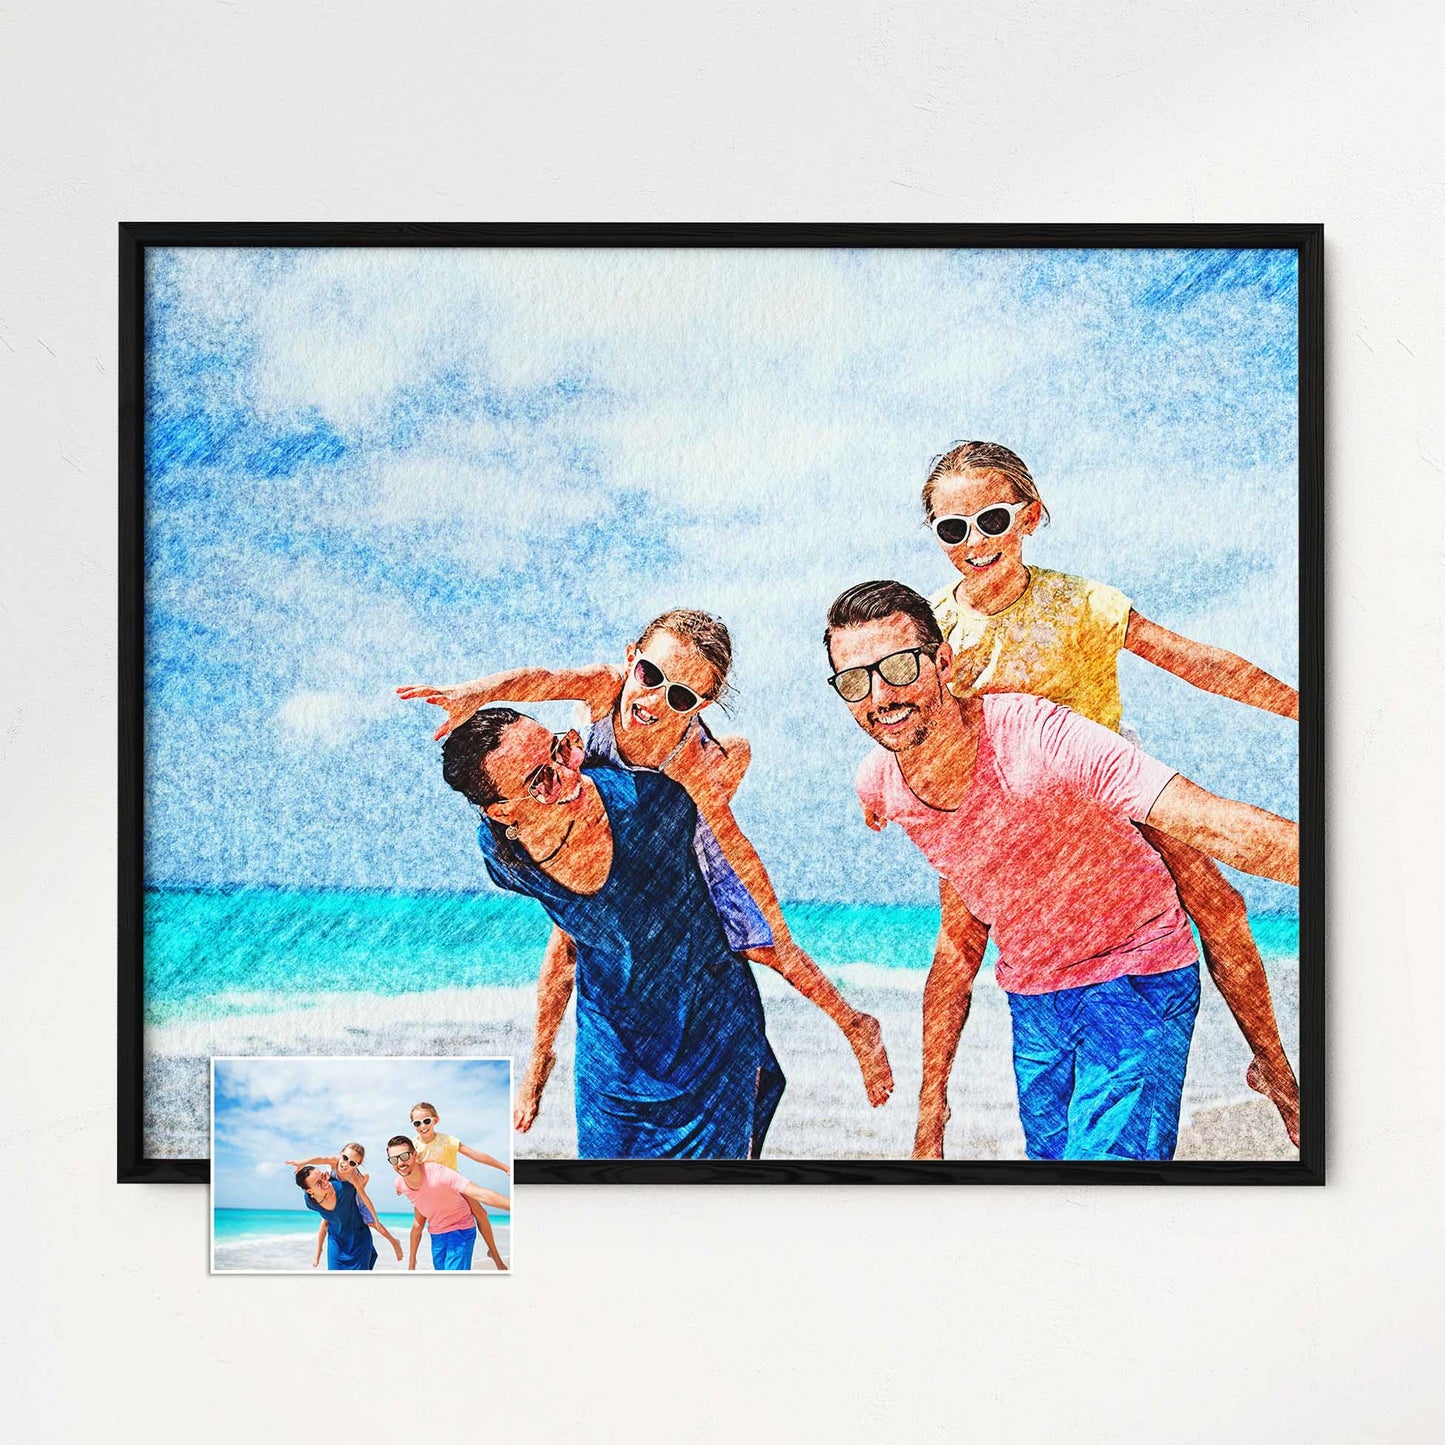 Authentic and Elegant: Transform your favorite photo into a personalised fabric texture framed print. The real and natural texture of the fabric gives it an authentic look, creating a unique and original piece of art